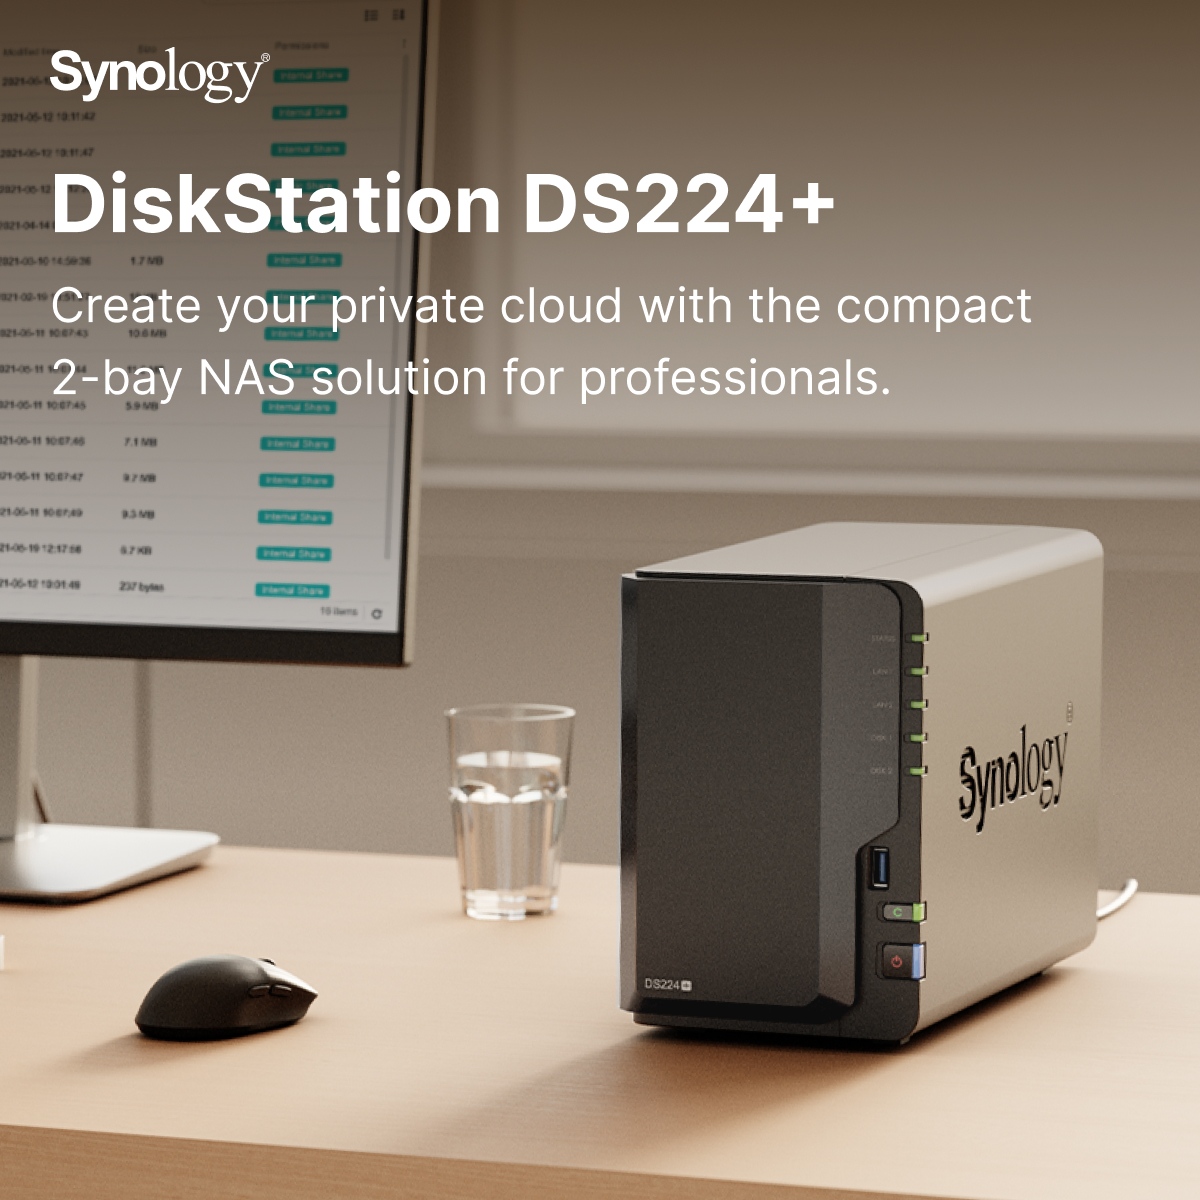 Synology Inc. on X: The DS224+ launched today and is ready to centralize  your small business' data. To learn how the DS224+ can help automate your  small business' backups, check out this